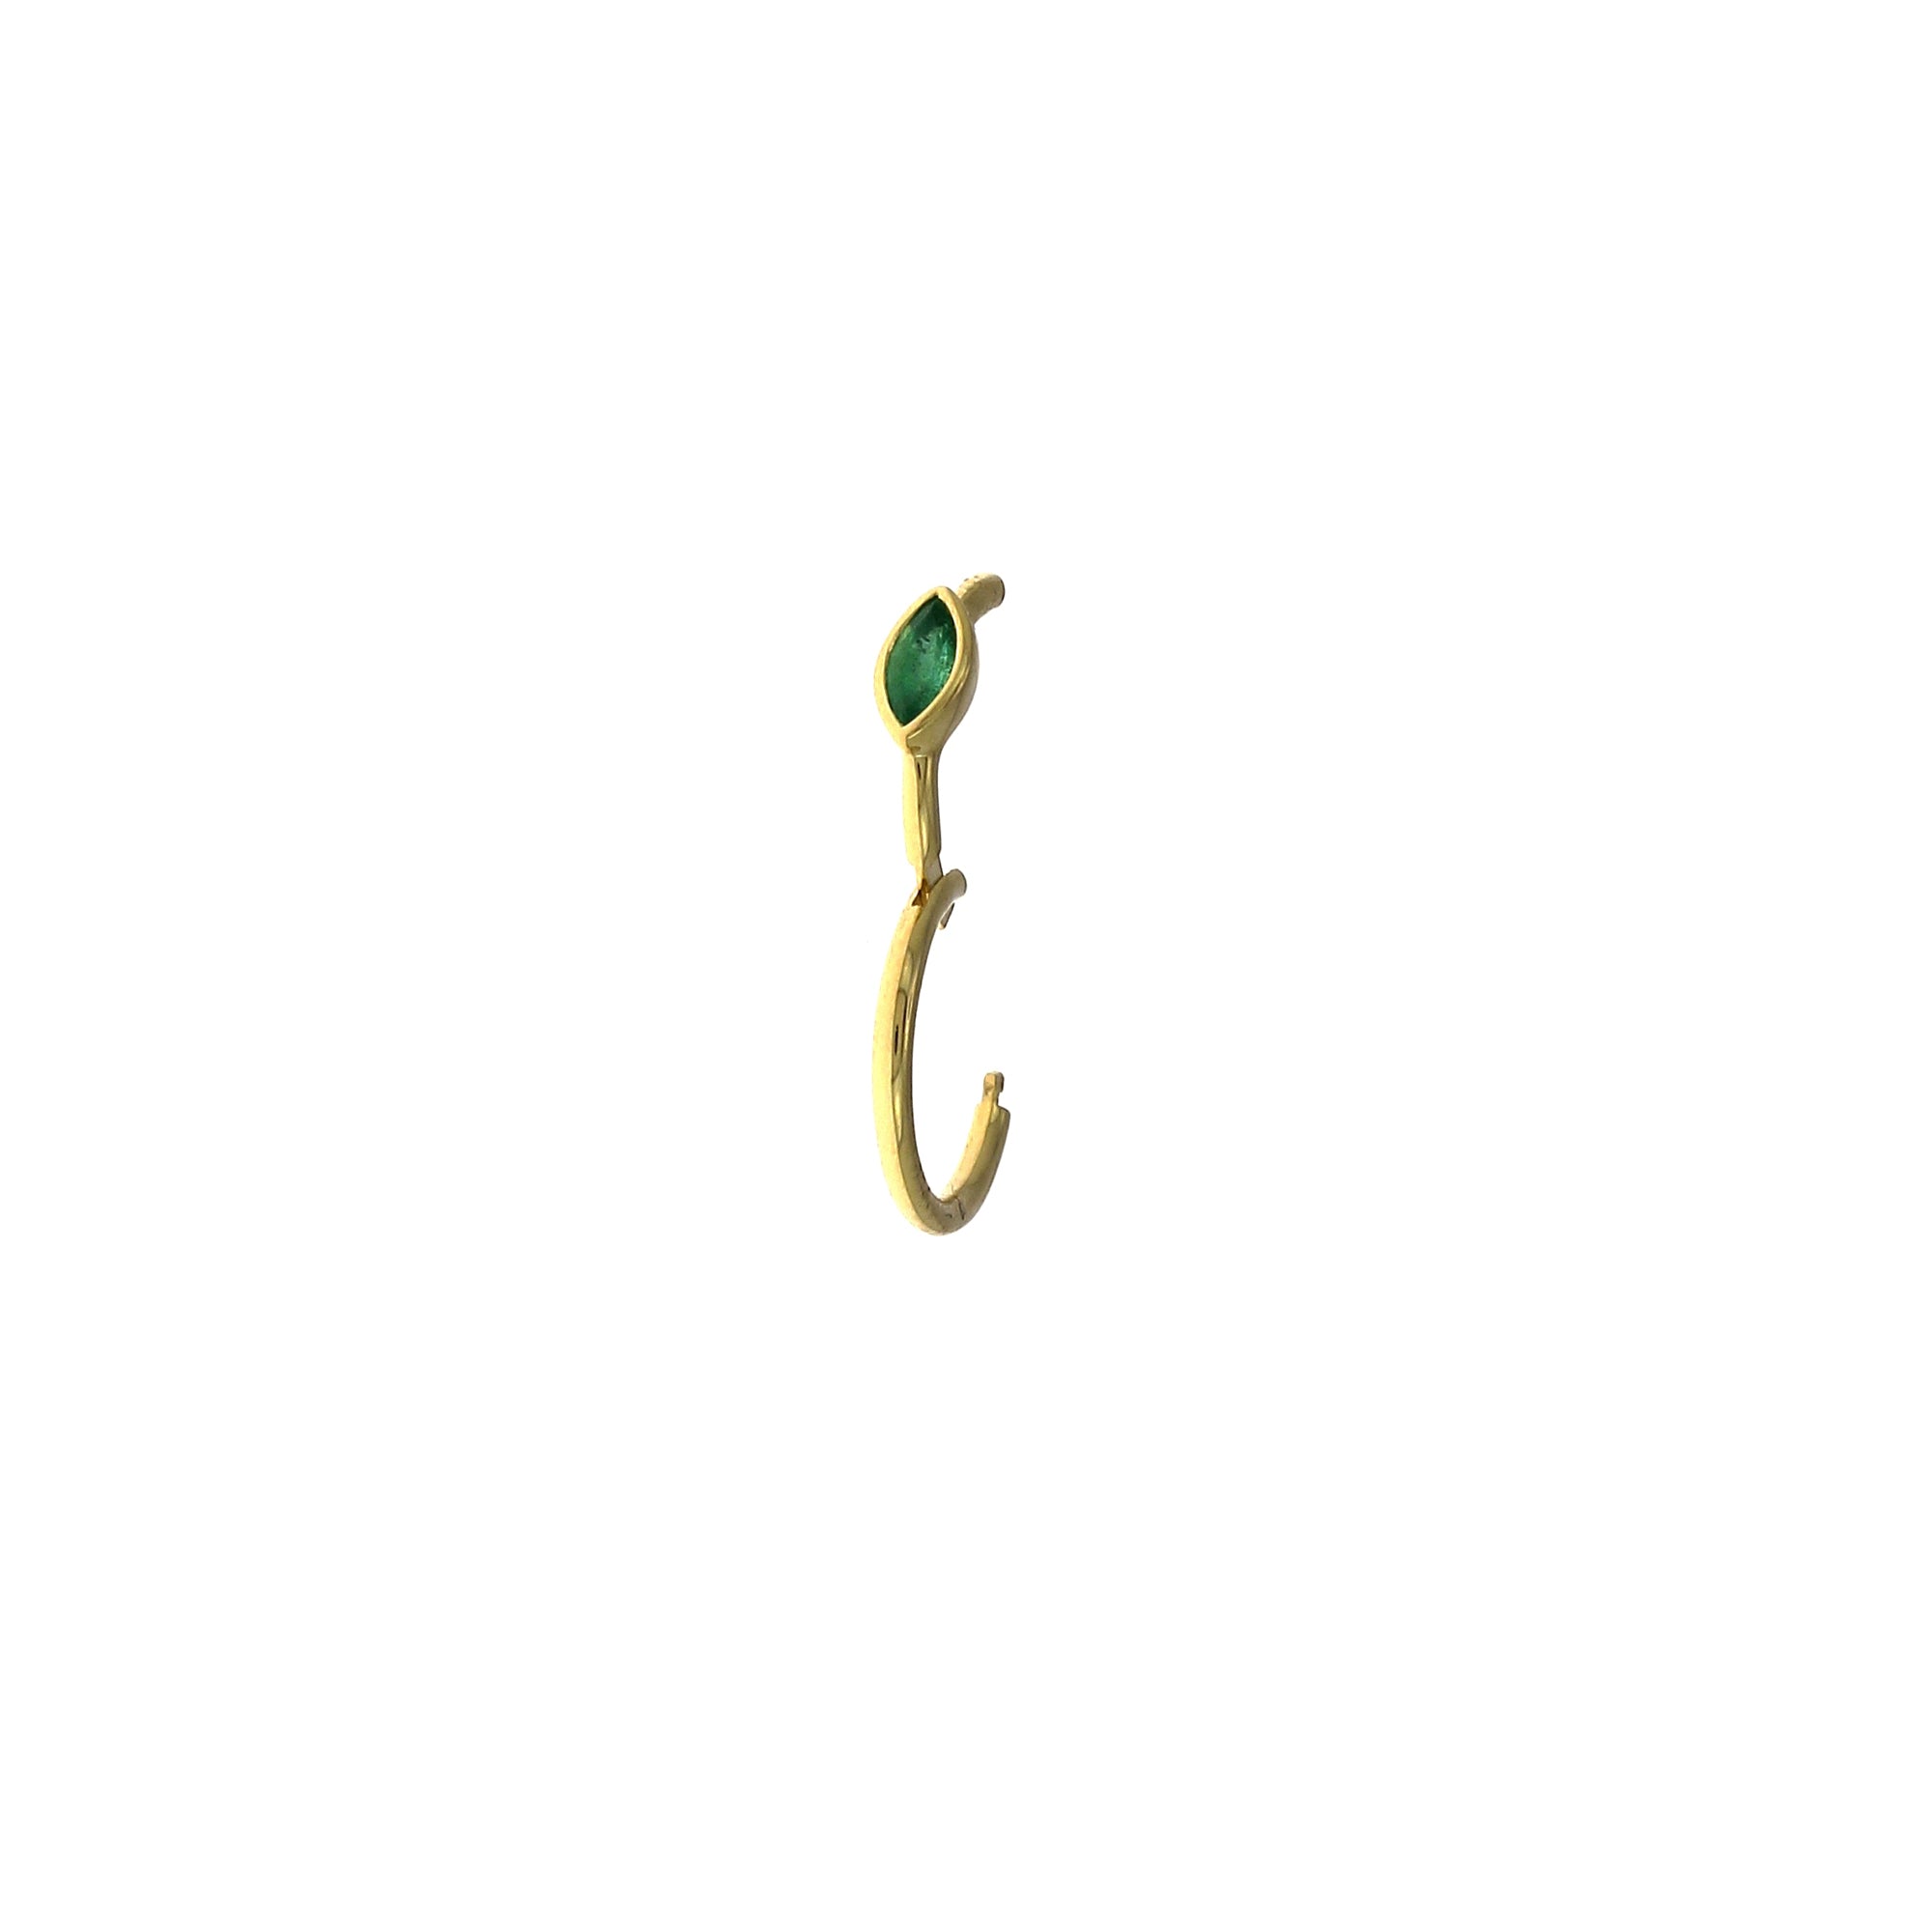 8mm Marquise Emerald 3x2mm Yellow Gold Hoop